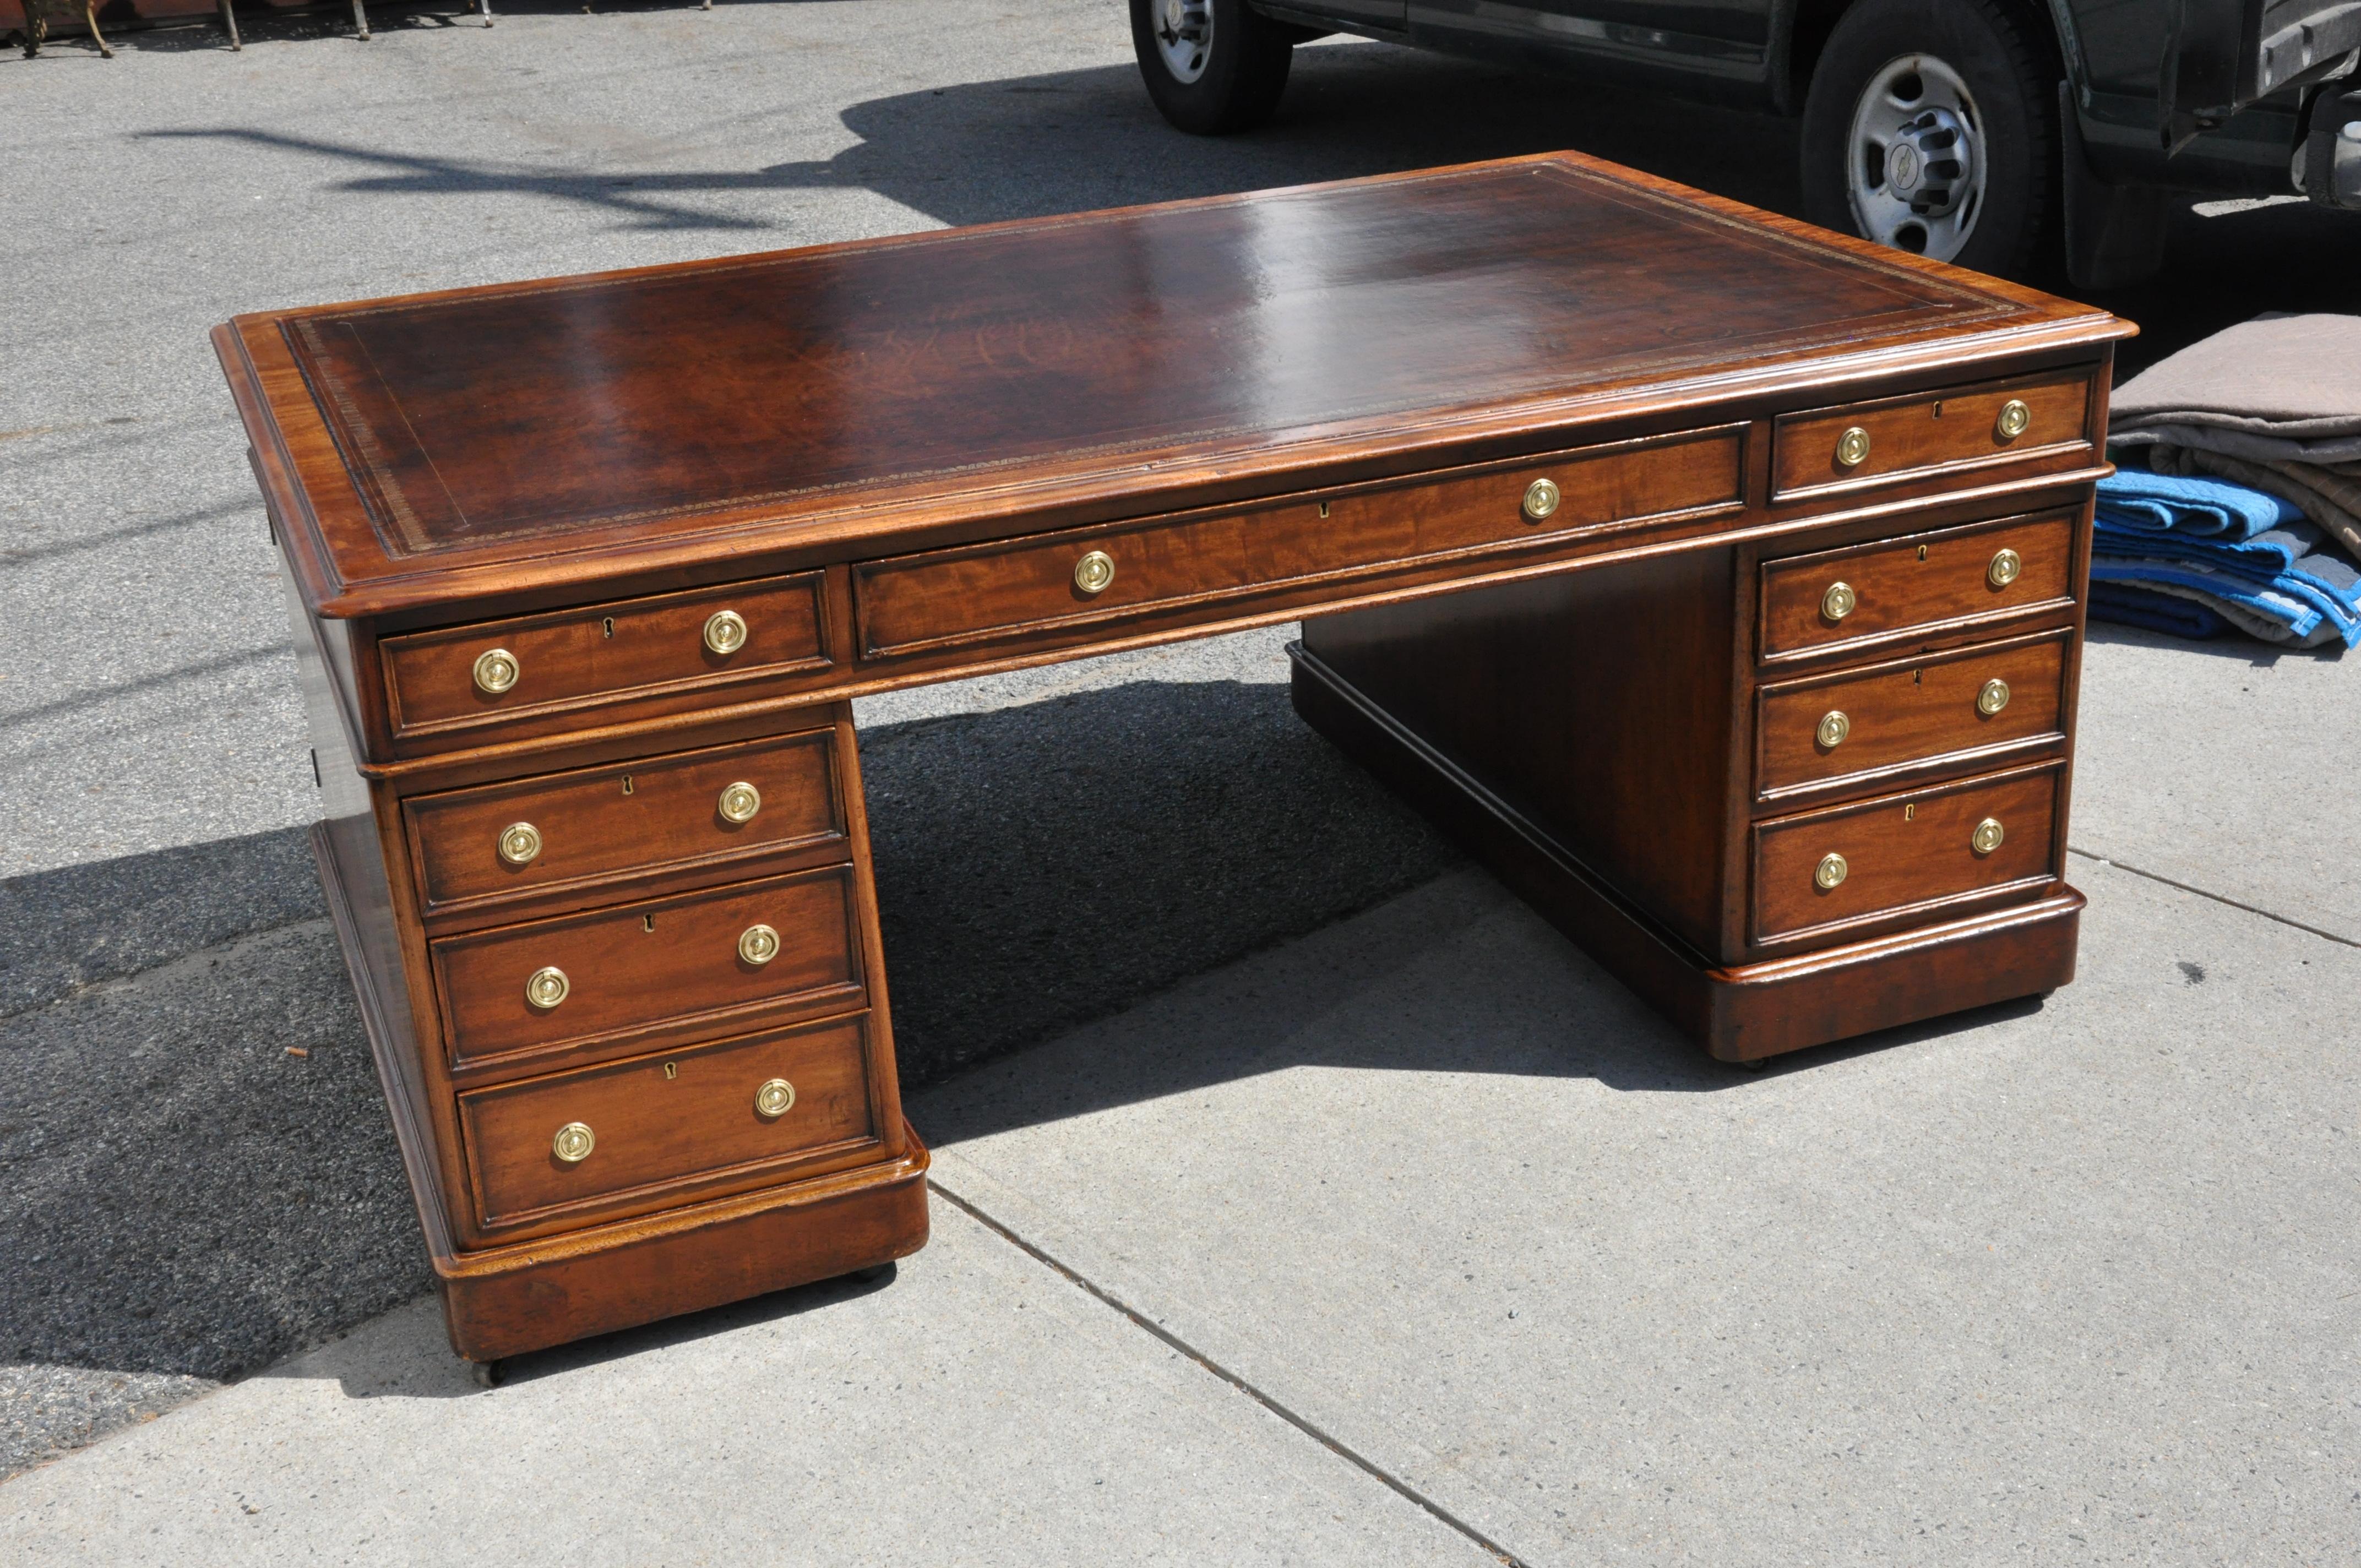 Fine Georgian mahogany English partner desk

Rich mahogany three-part desk, for easy transportation. One side with drawers over drawered side cabinets, opposite side with drawers over doored cabinets. Early if not original leather. Great patina